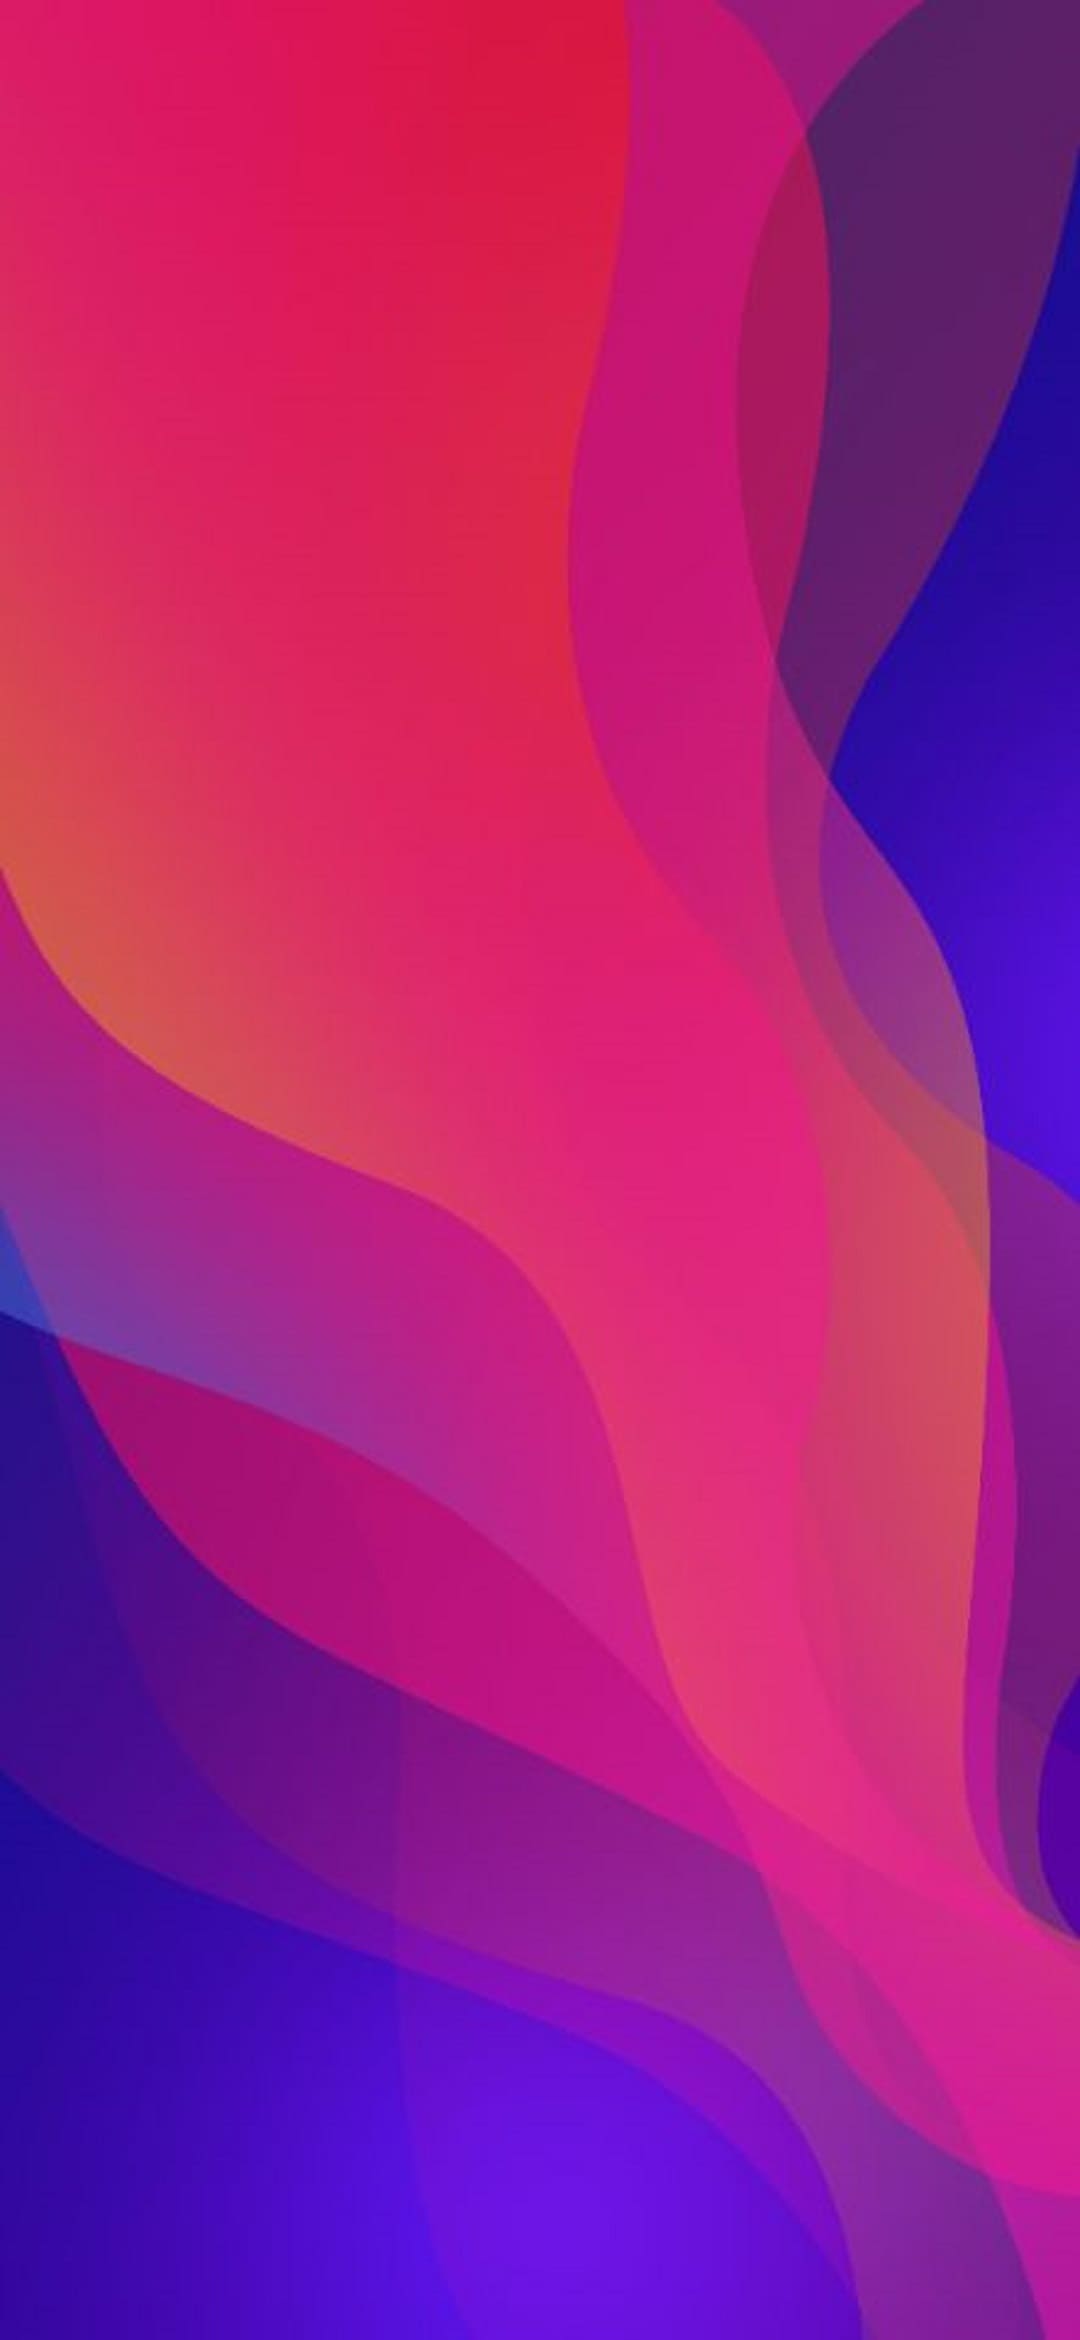 Wallpaper 3d Android Oppo Image Num 8